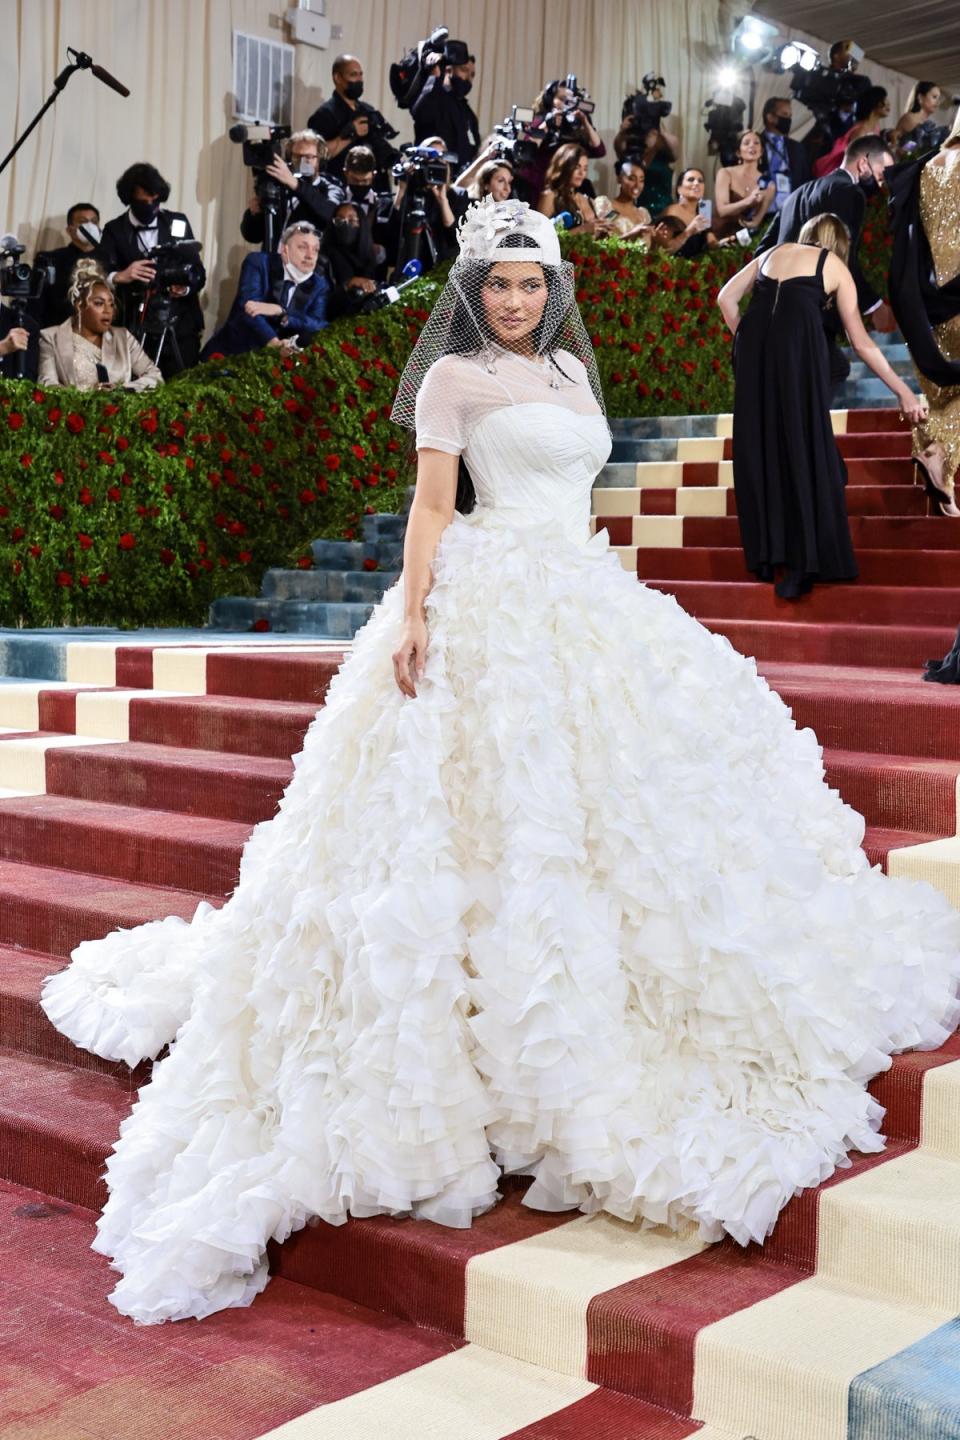 Kylie Jenner in Virgil Abloh’s Off-White Fall 2022 wedding gown at the 2022 Met Gala (Getty Images)